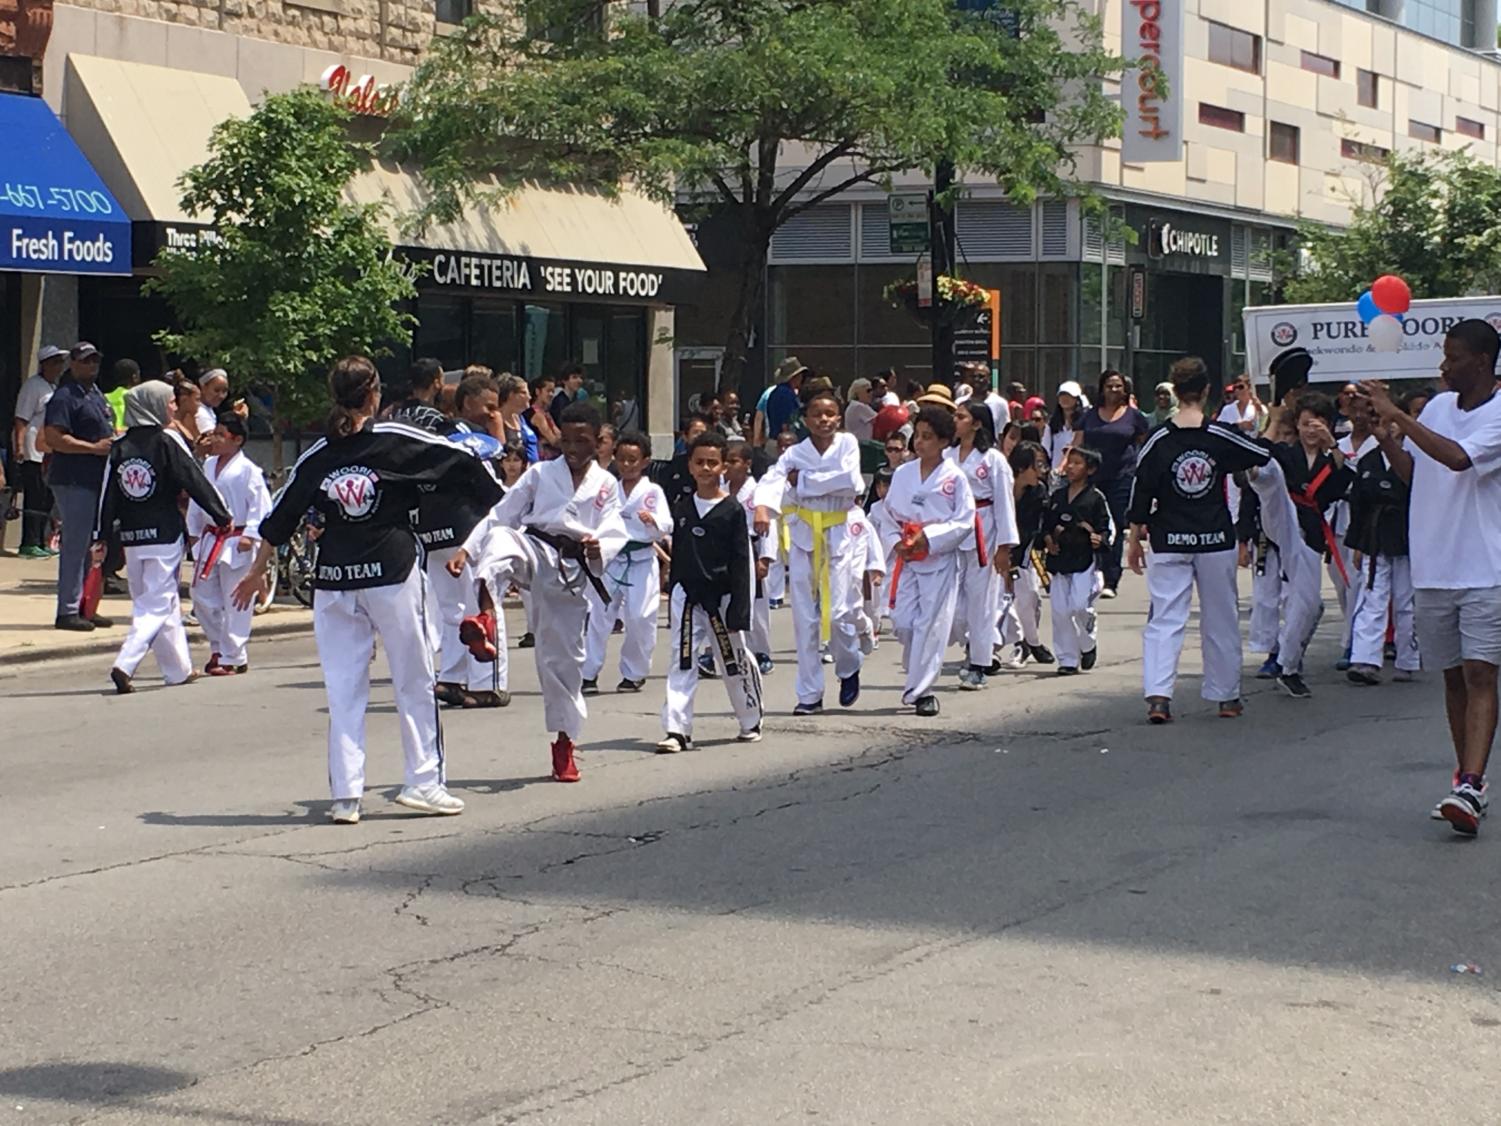 One of two contingents of martial arts students, the pupils at Pure Woori Taekwondo & Hapkido Academy took turns taking shots at punching bags as they marched.